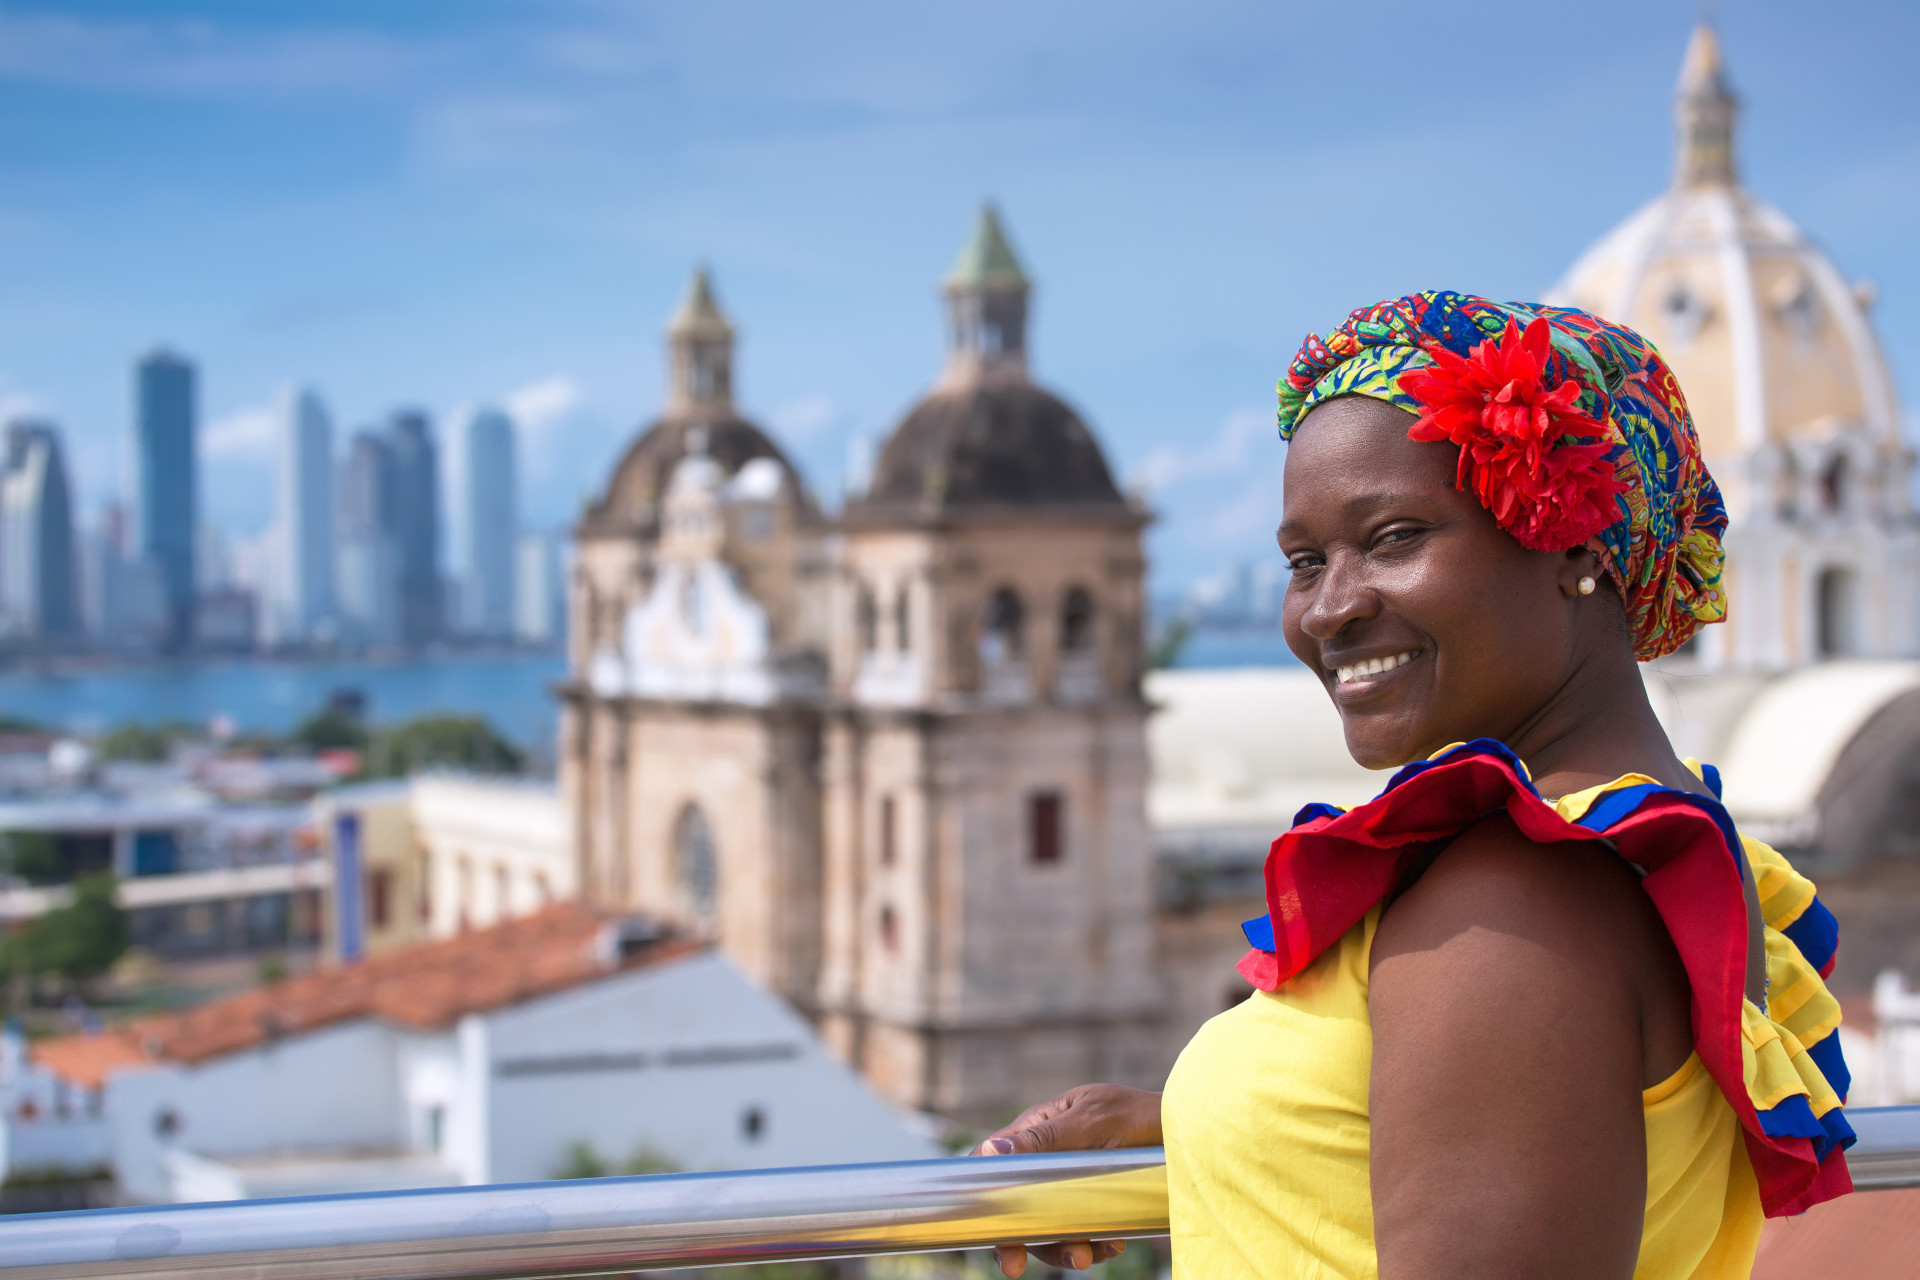 A UNESCO World Heritage Site, Cartagena blends modern and traditional features. Tourists can enjoy a stroll through the colorful streets of the walled city.